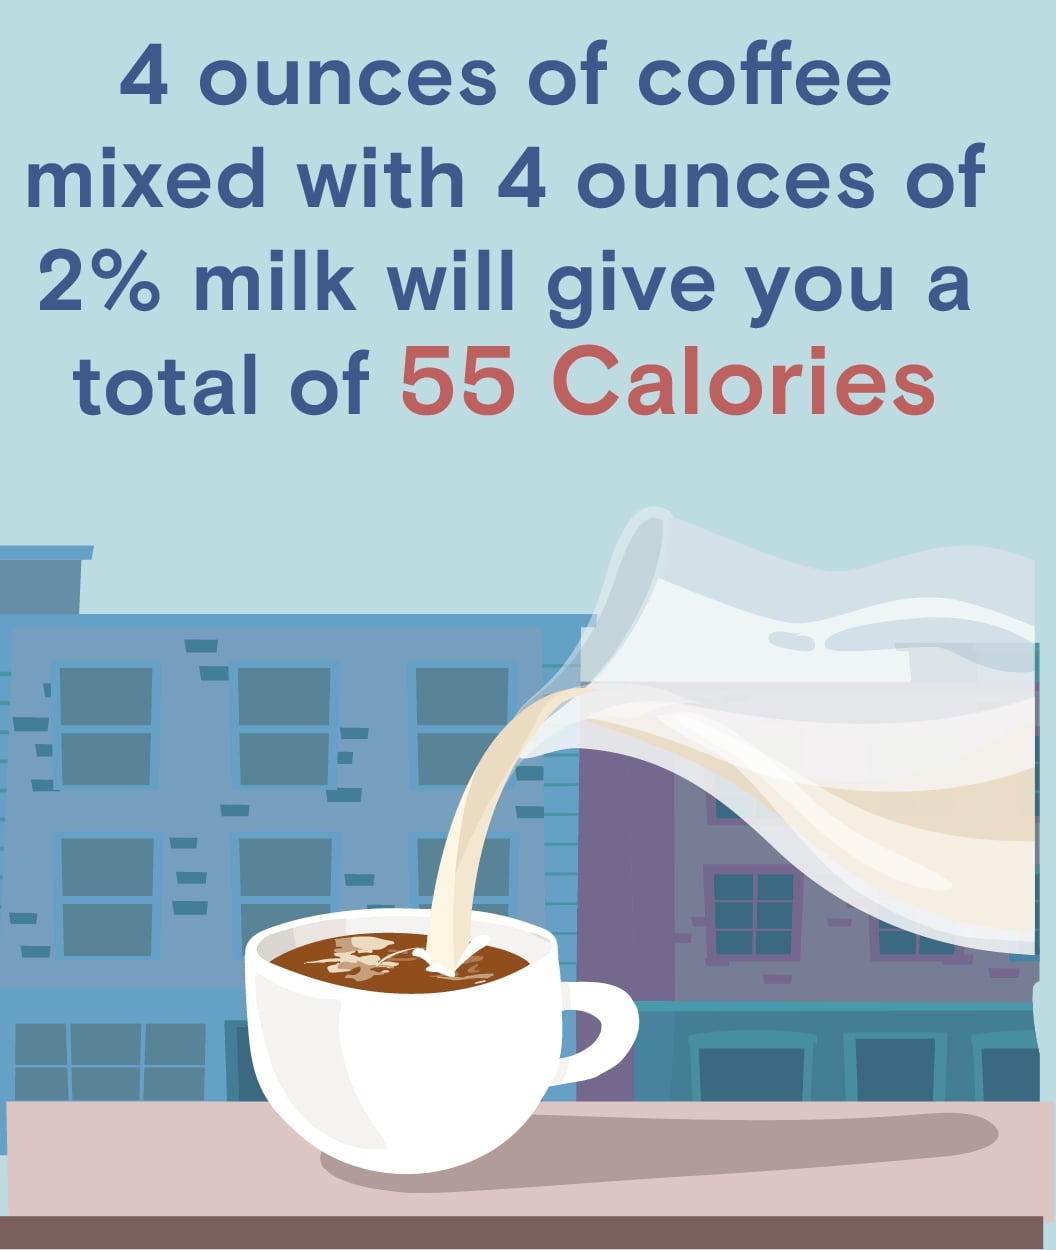 How many calories are in a cup of coffee?